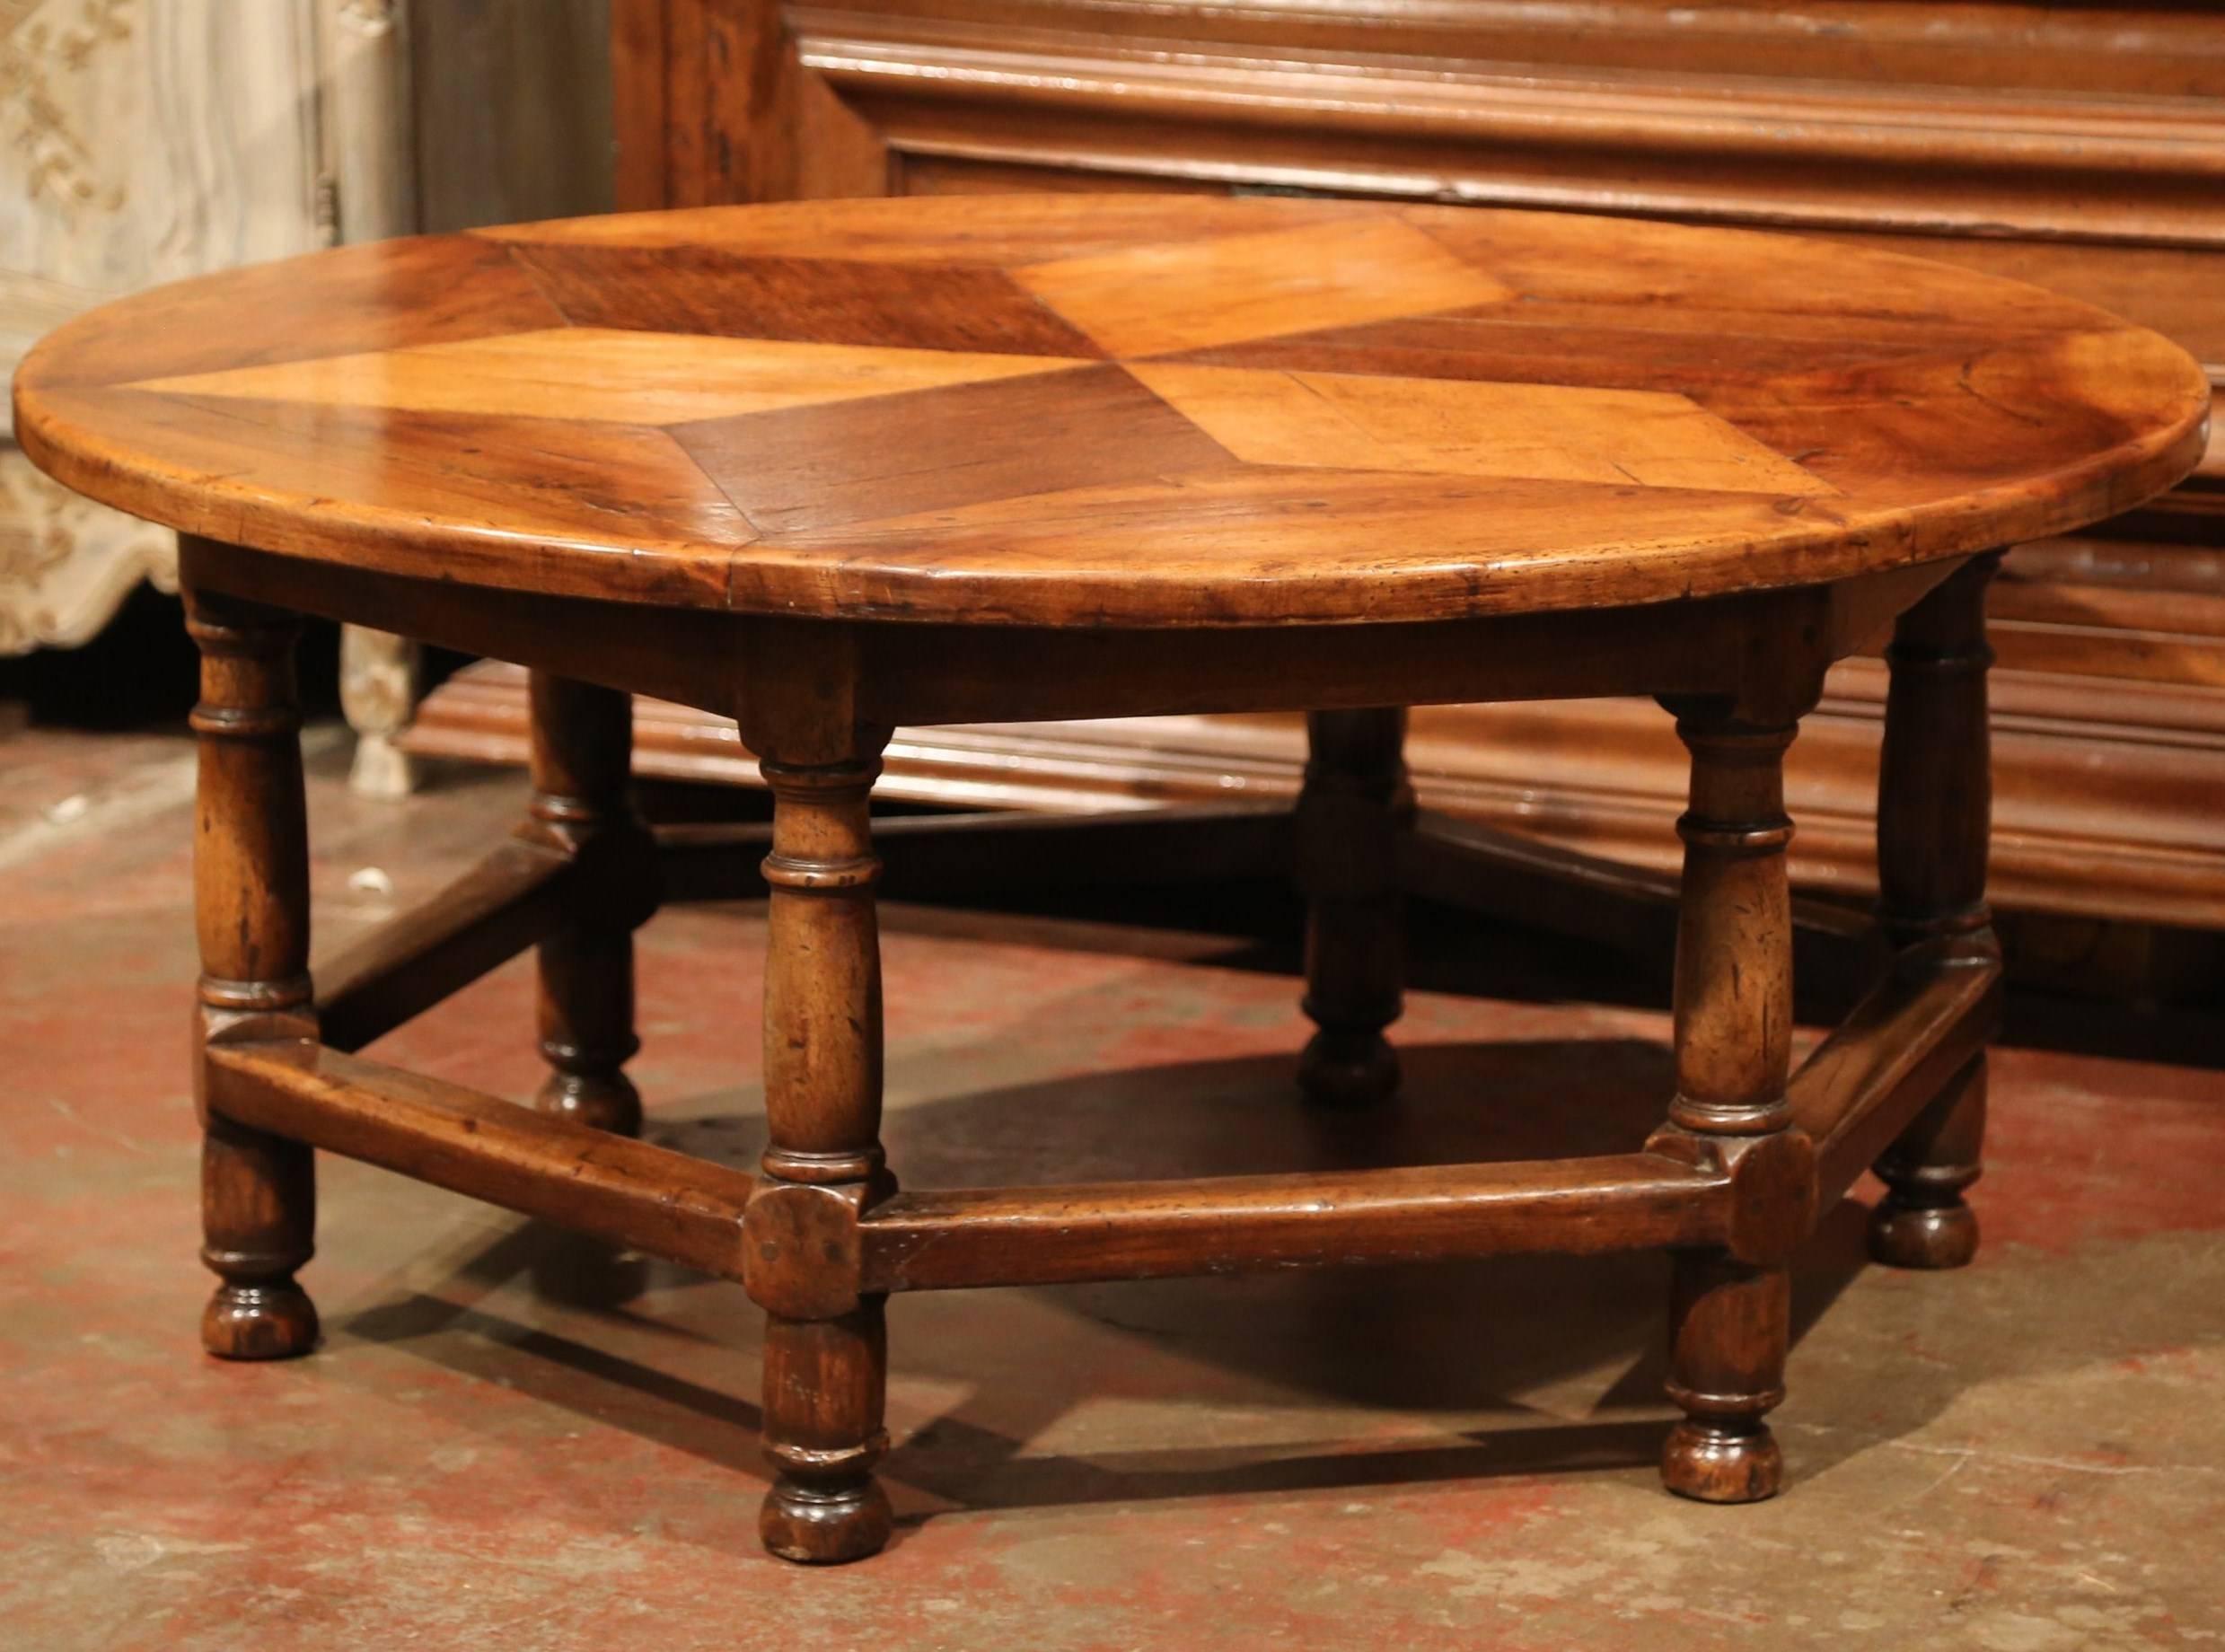 Hand-Carved Midcentury French Six-Leg Round Coffee Table with Geometric Parquet Top